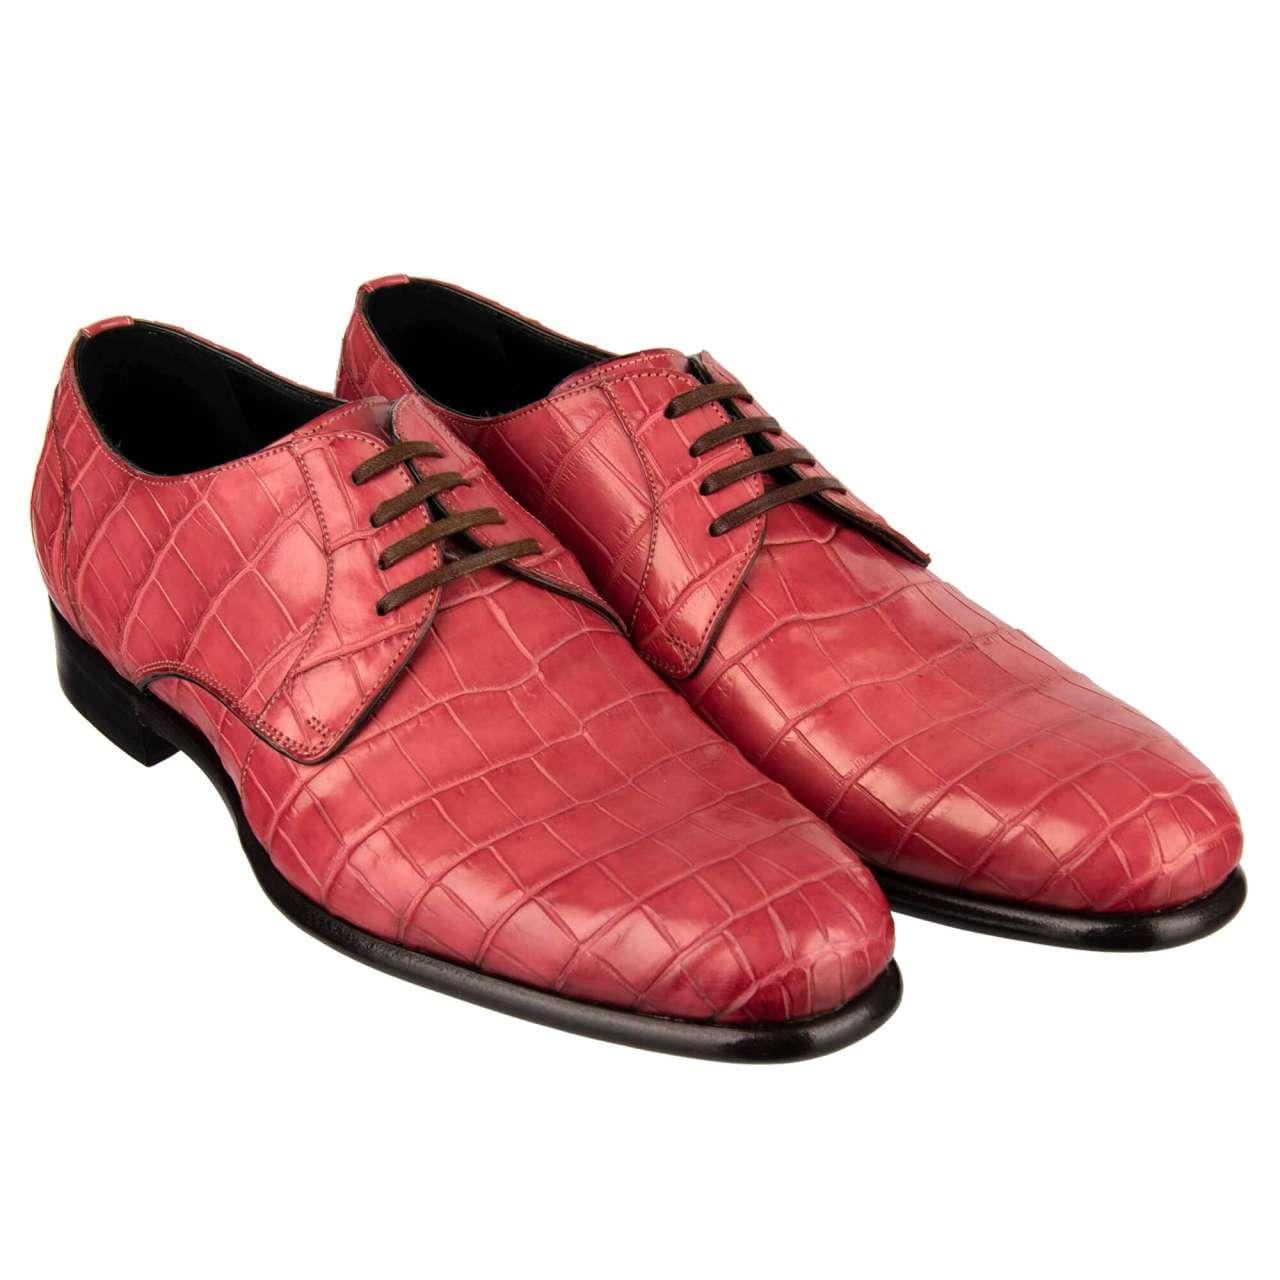 Dolce & Gabbana Crocodile Leather Derby Shoes SIENA Pink EUR 40 For Sale 3